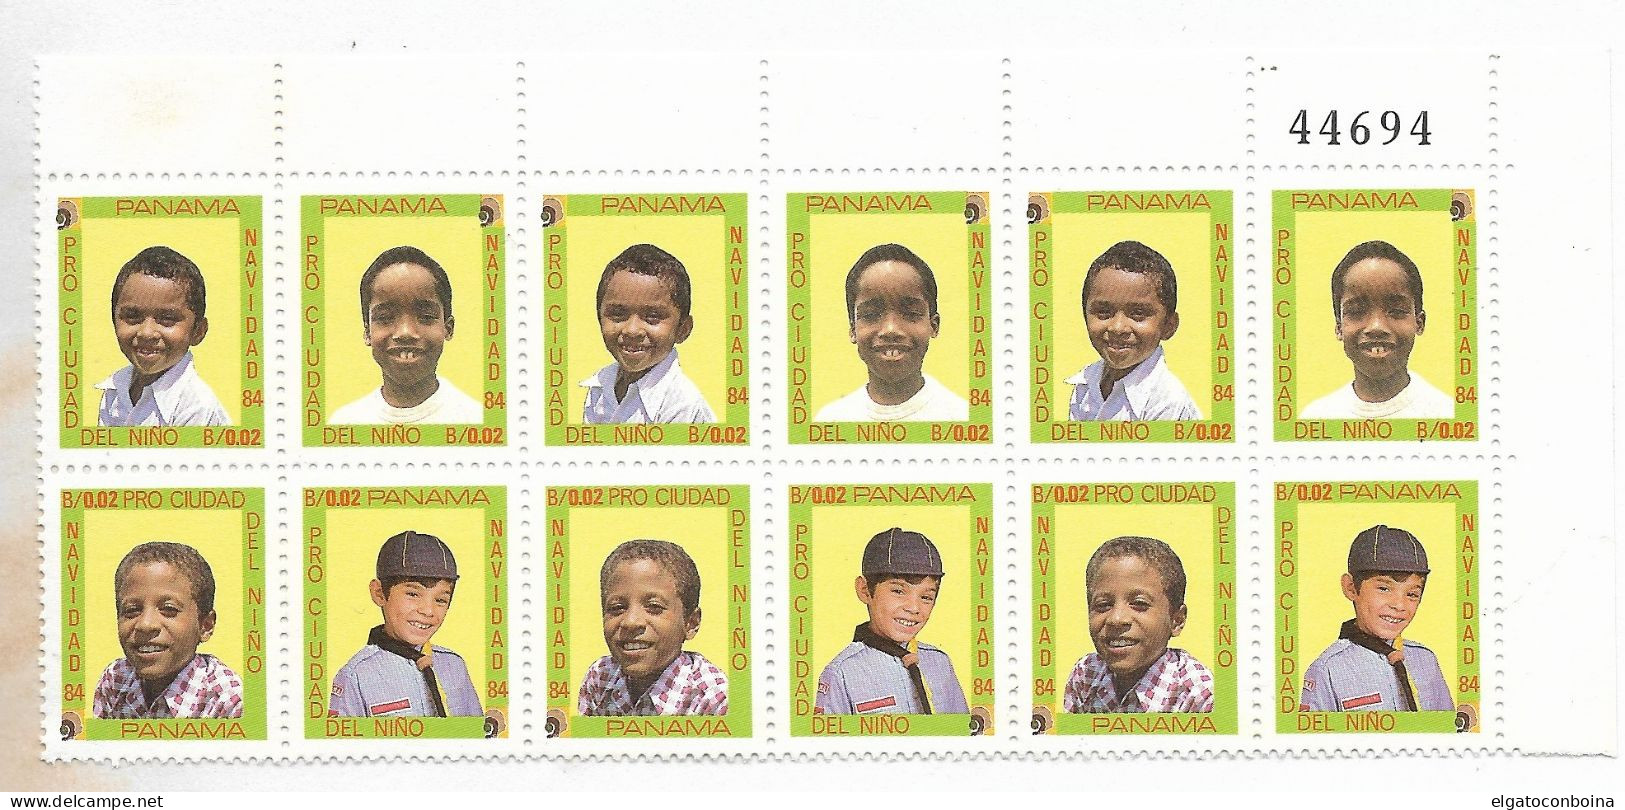 PANAMA YEAR 1984 PRO CHILDREN CITY CHRISTMAS X3 BLOCKS OF FOUR DIFFERENT STAMPS MNH SC RA103-6 - Panamá